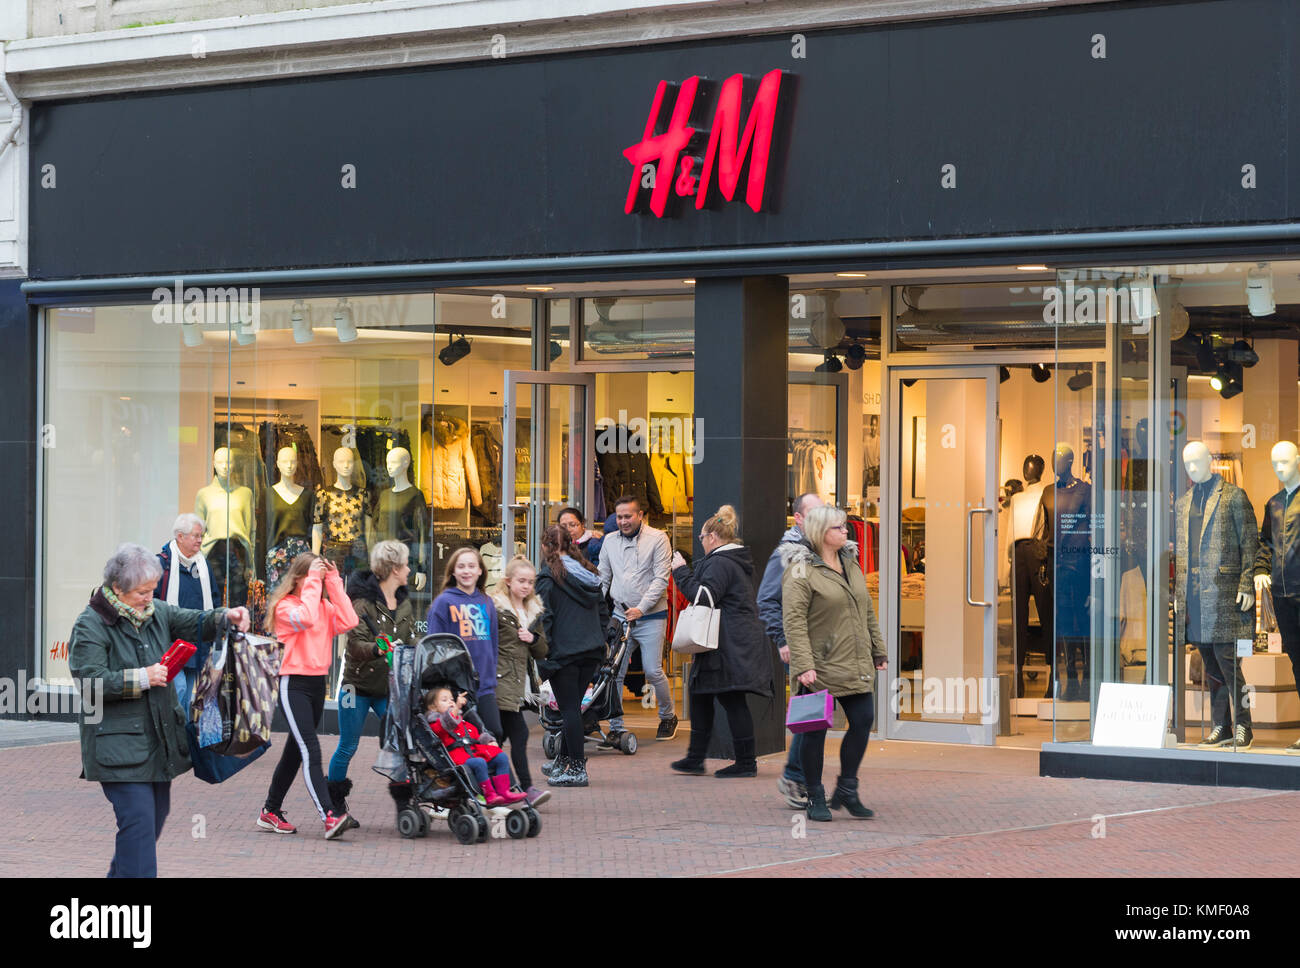 H&m Store Front High Resolution Stock Photography and Images - Alamy